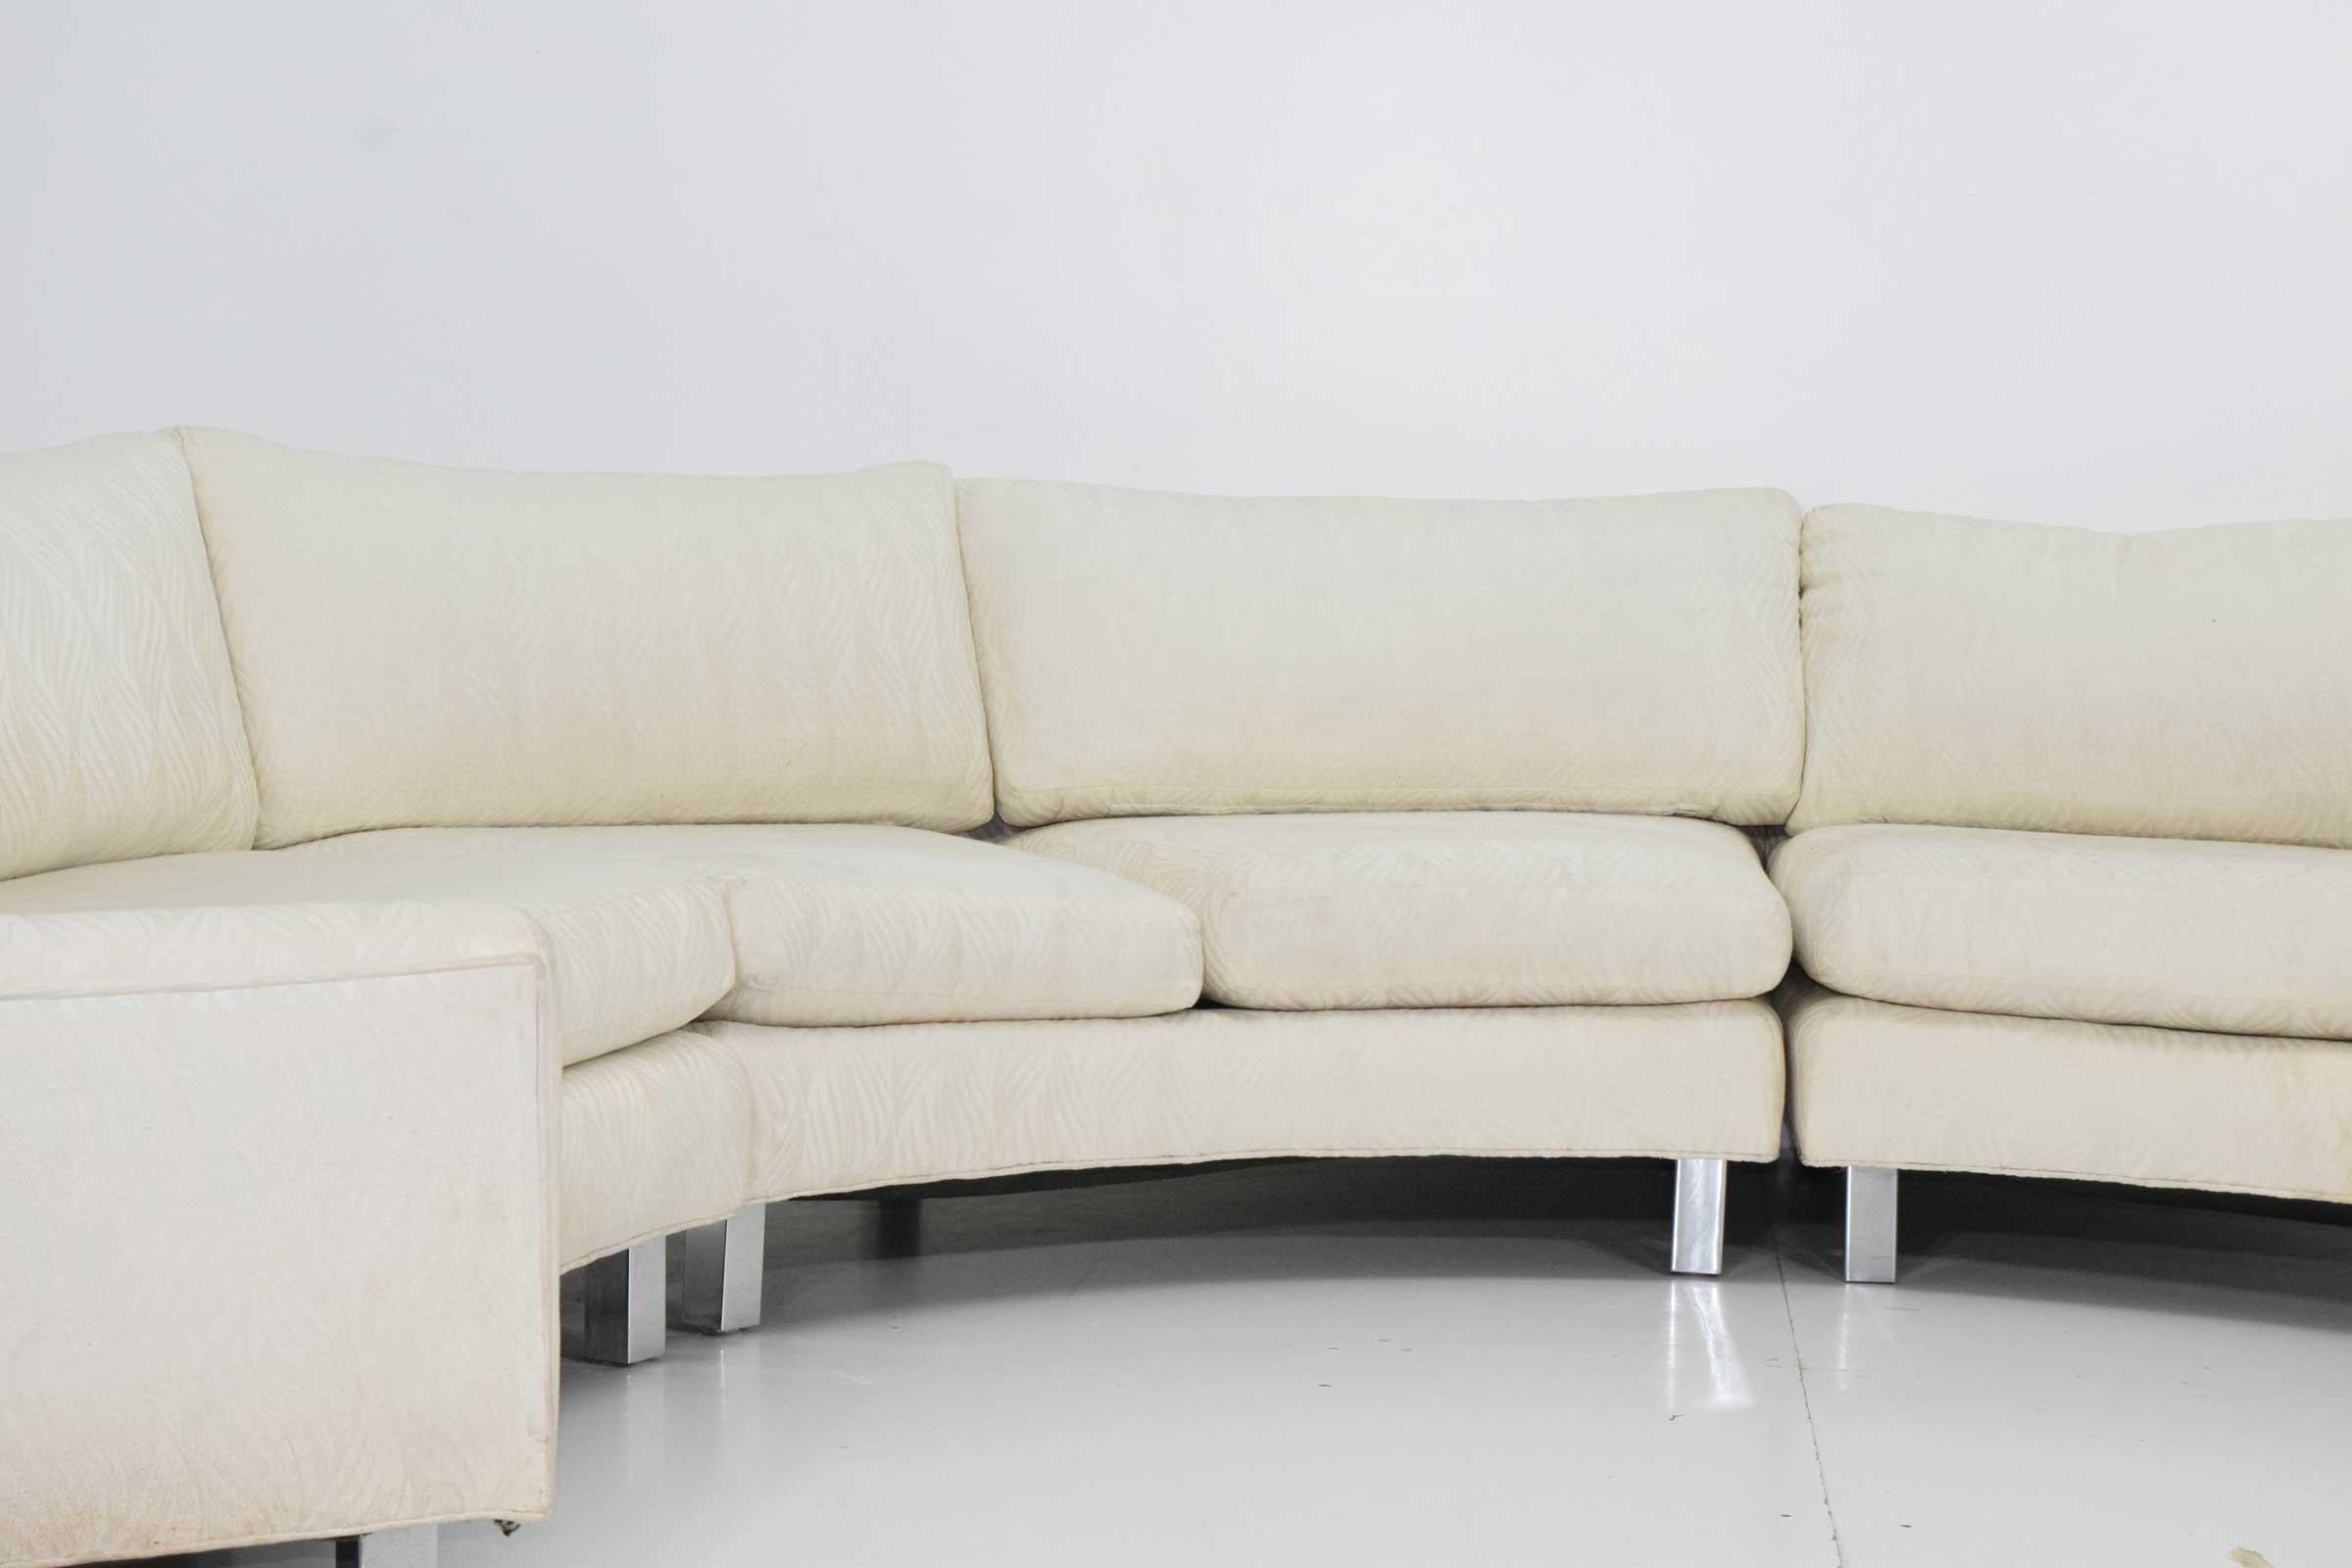 Milo Baughman Four Section Curved Sectional Sofa in White In Good Condition For Sale In Dallas, TX